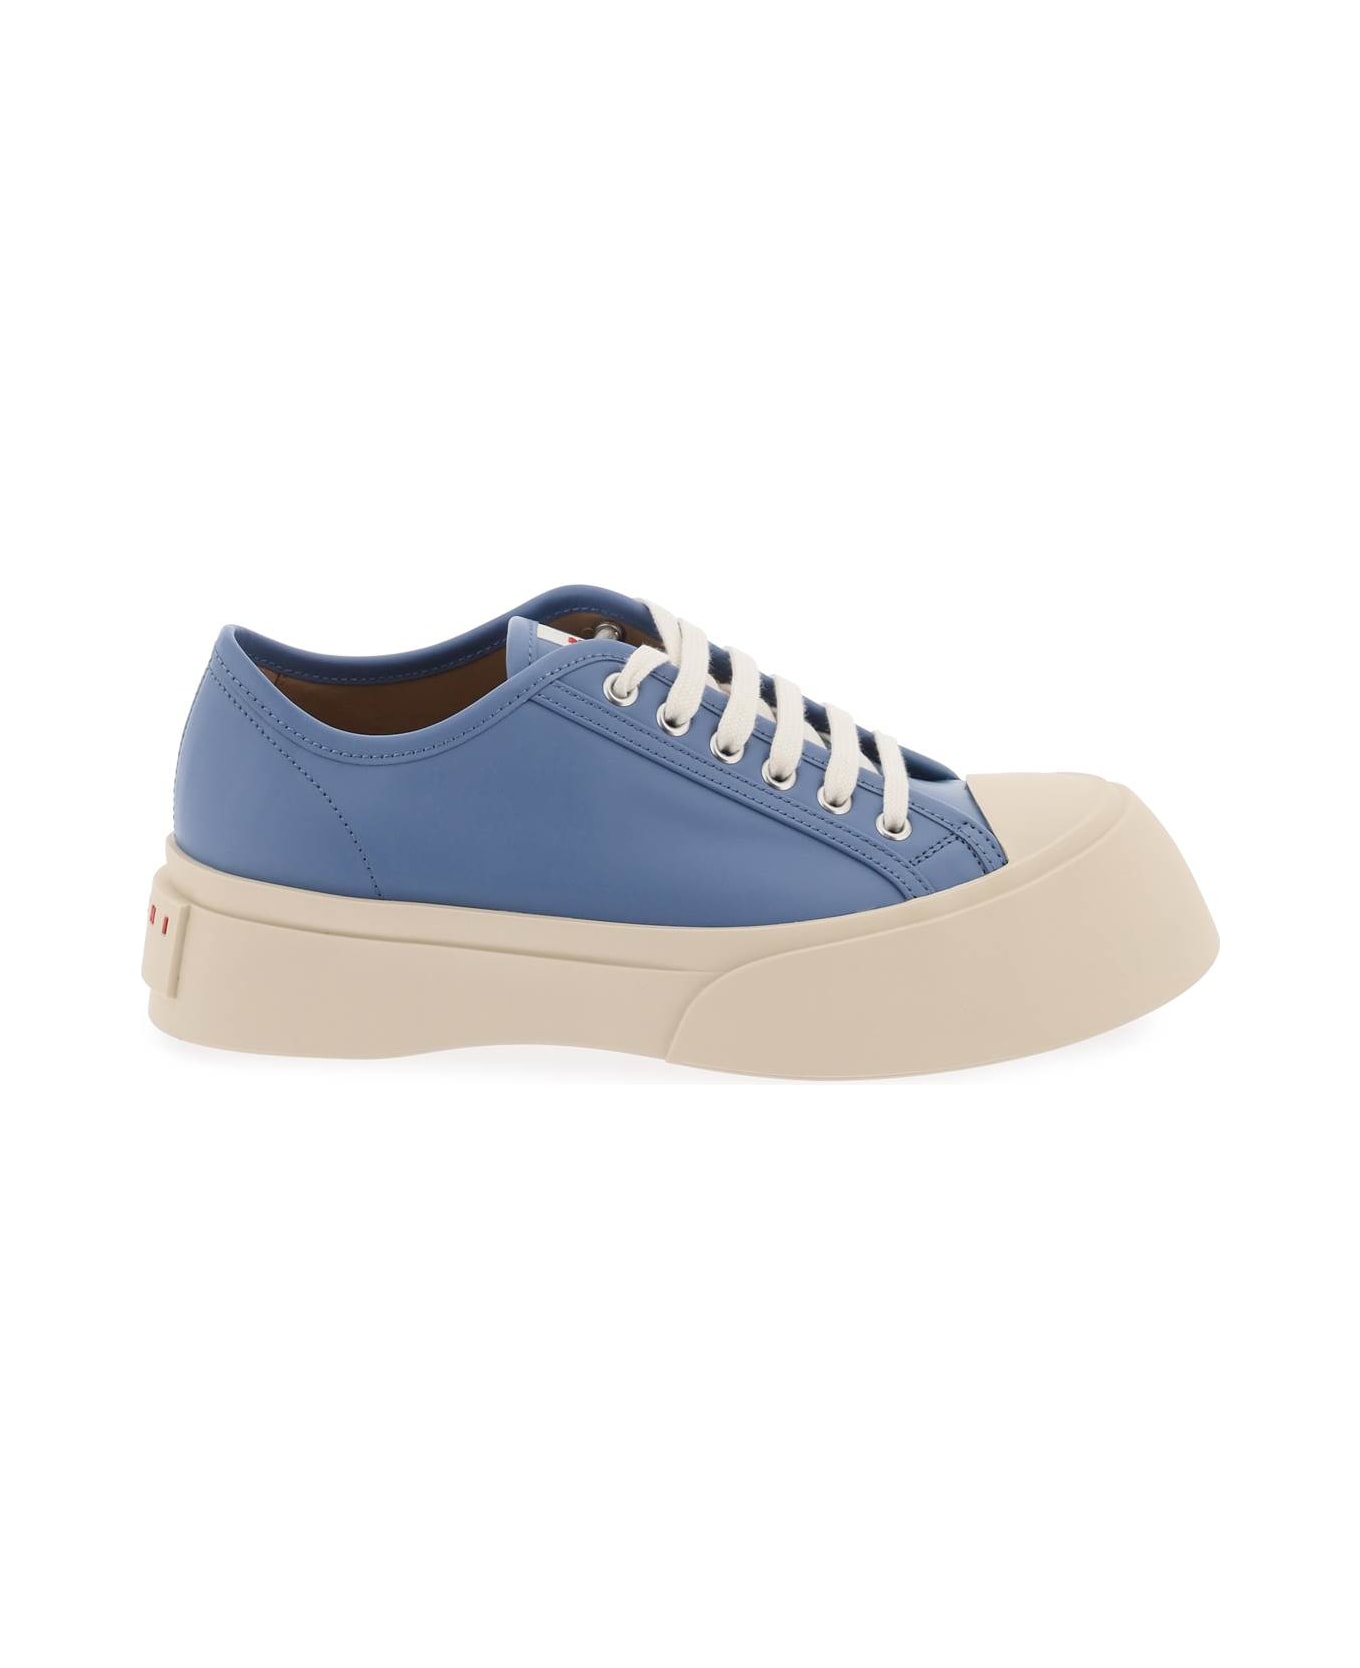 Marni Leather Pablo Sneakers - Gnawed Blue